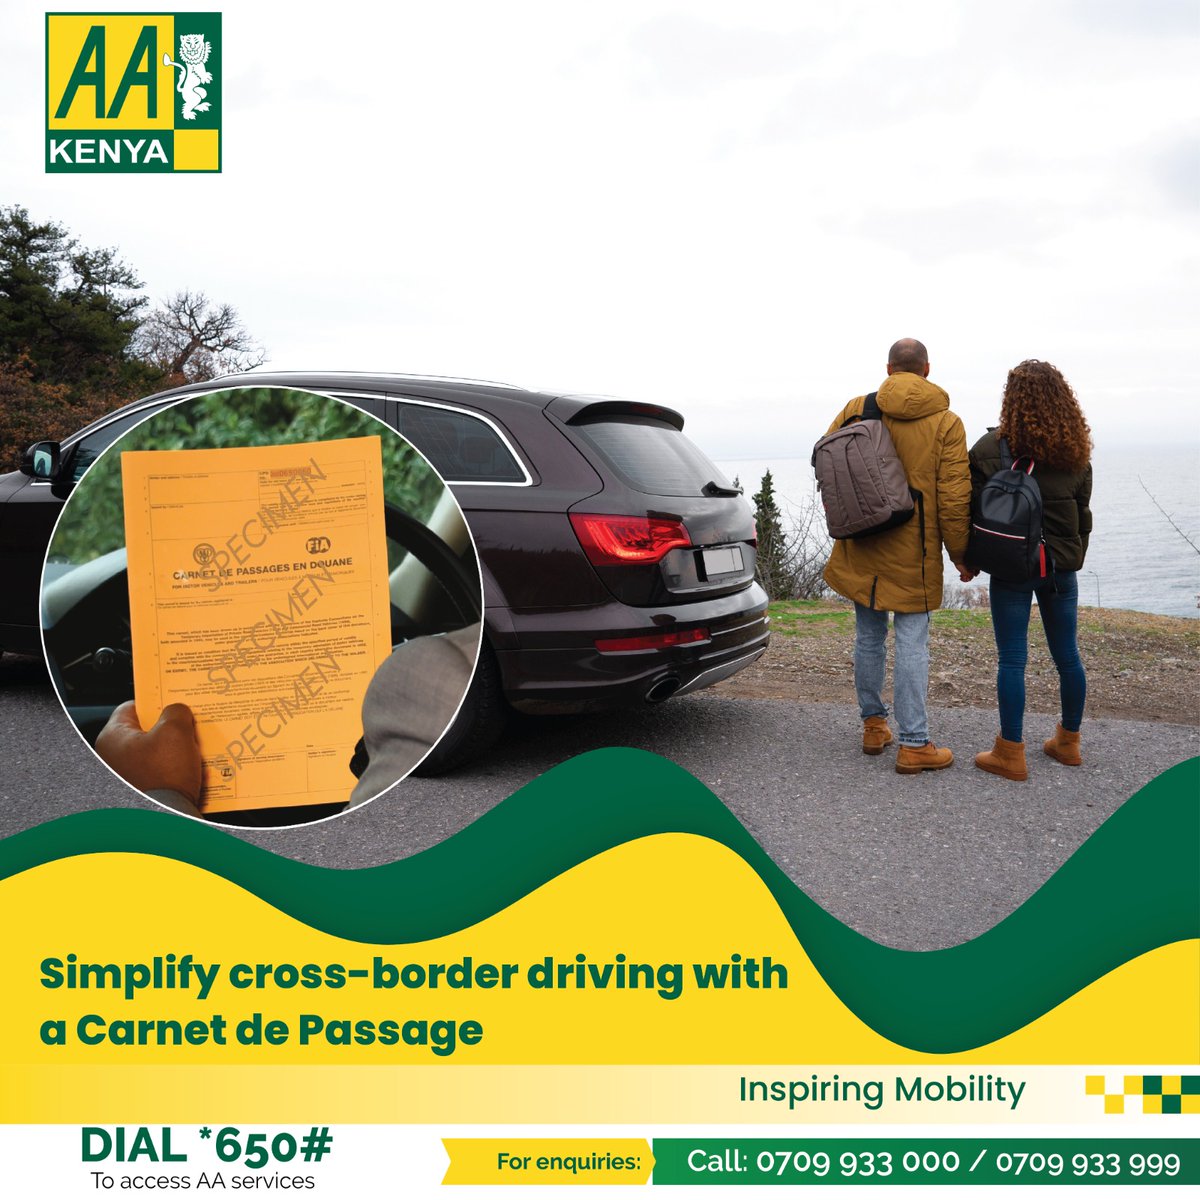 Ready to navigate international roads? AA Kenya provides a Carnet de Passage that allows you to easily drive across borders. Get yours today by visiting any of our branches countrywide or calling us on 0709933000 for more information.
#AAKenyacares #Carnet #InspiringMobility